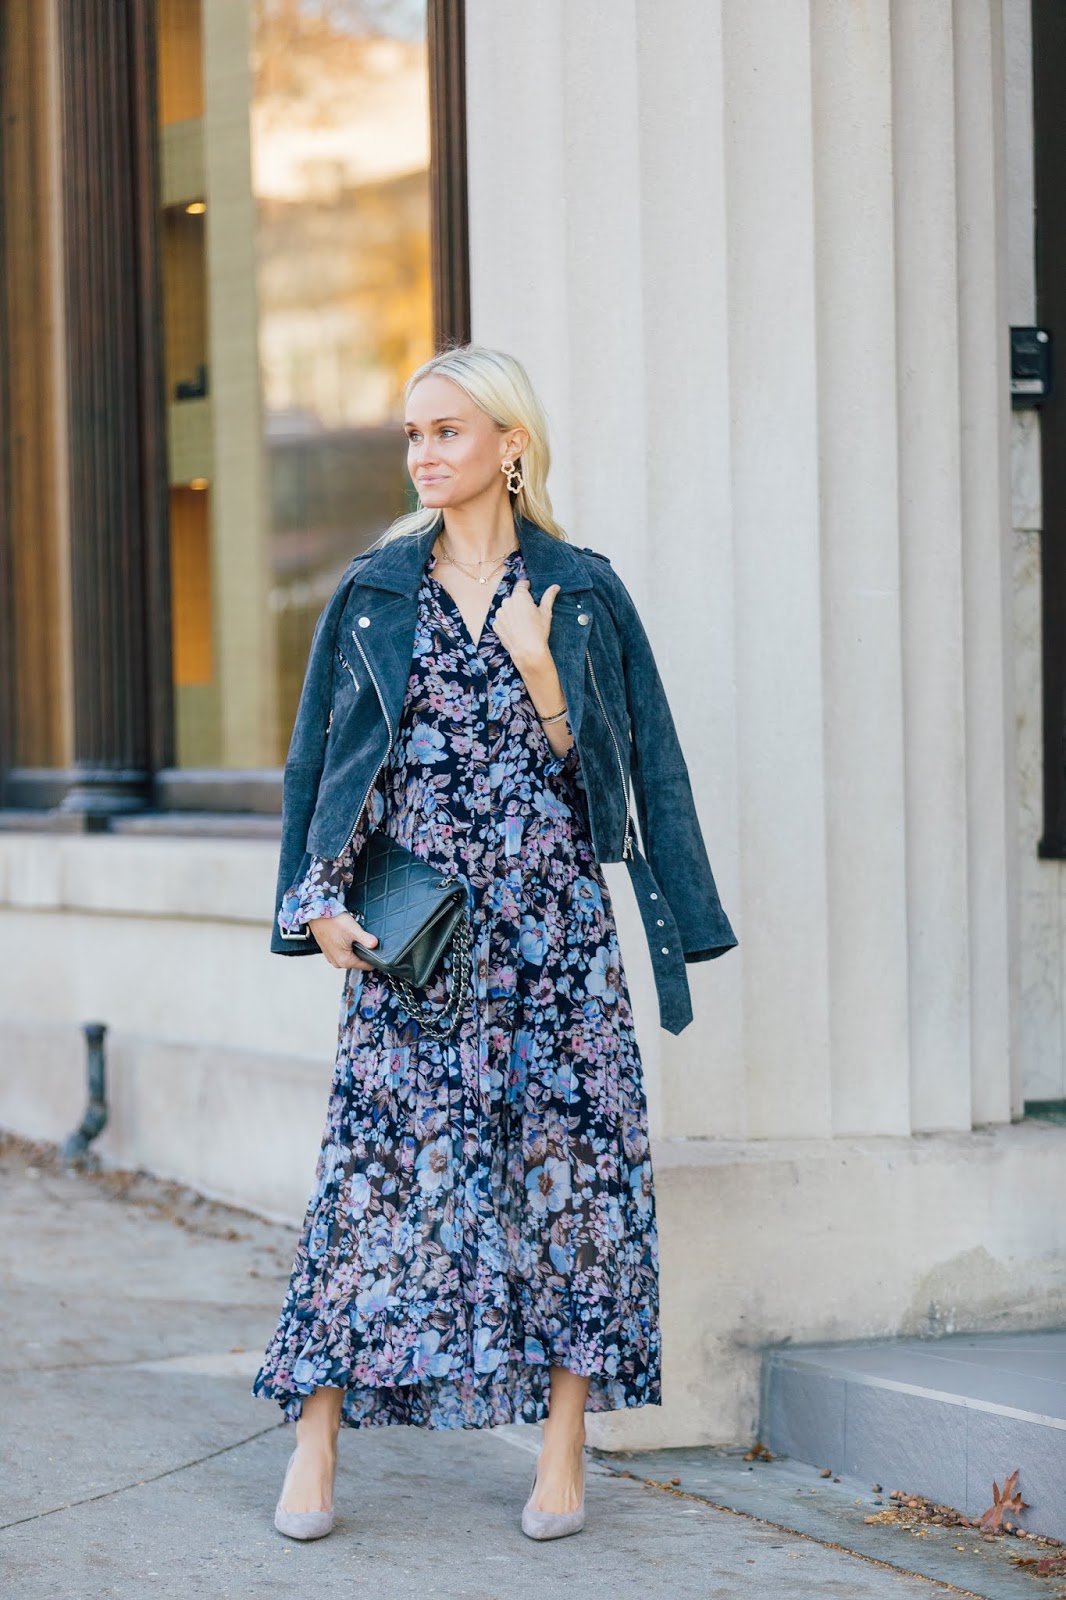 How to Style A Maxi Dress for Winter